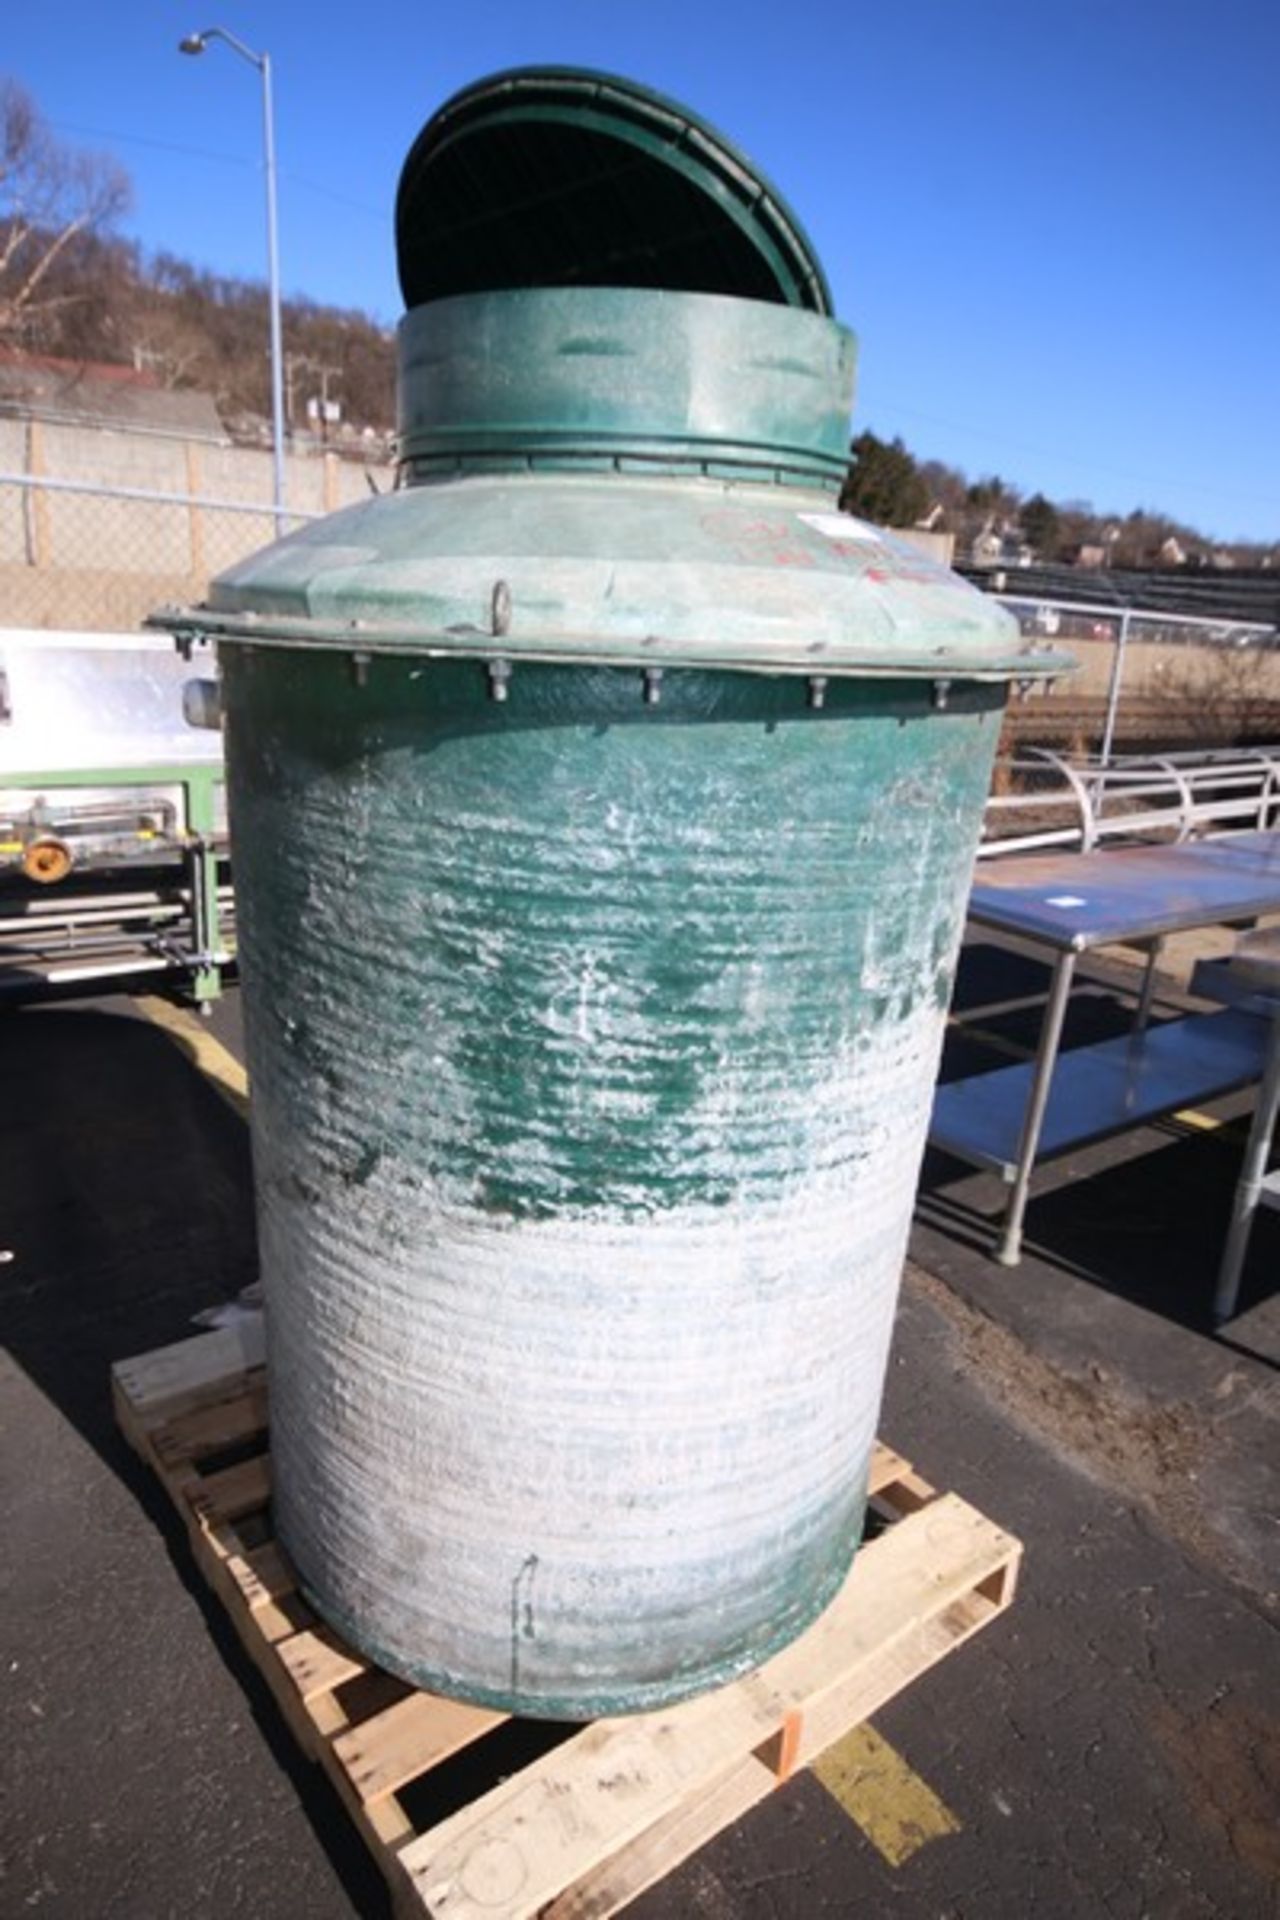 53" H x 40" W Fiberglass Pump Containment with (2) Sump Pump & Lid (INV#101785) (Located @ the MDG